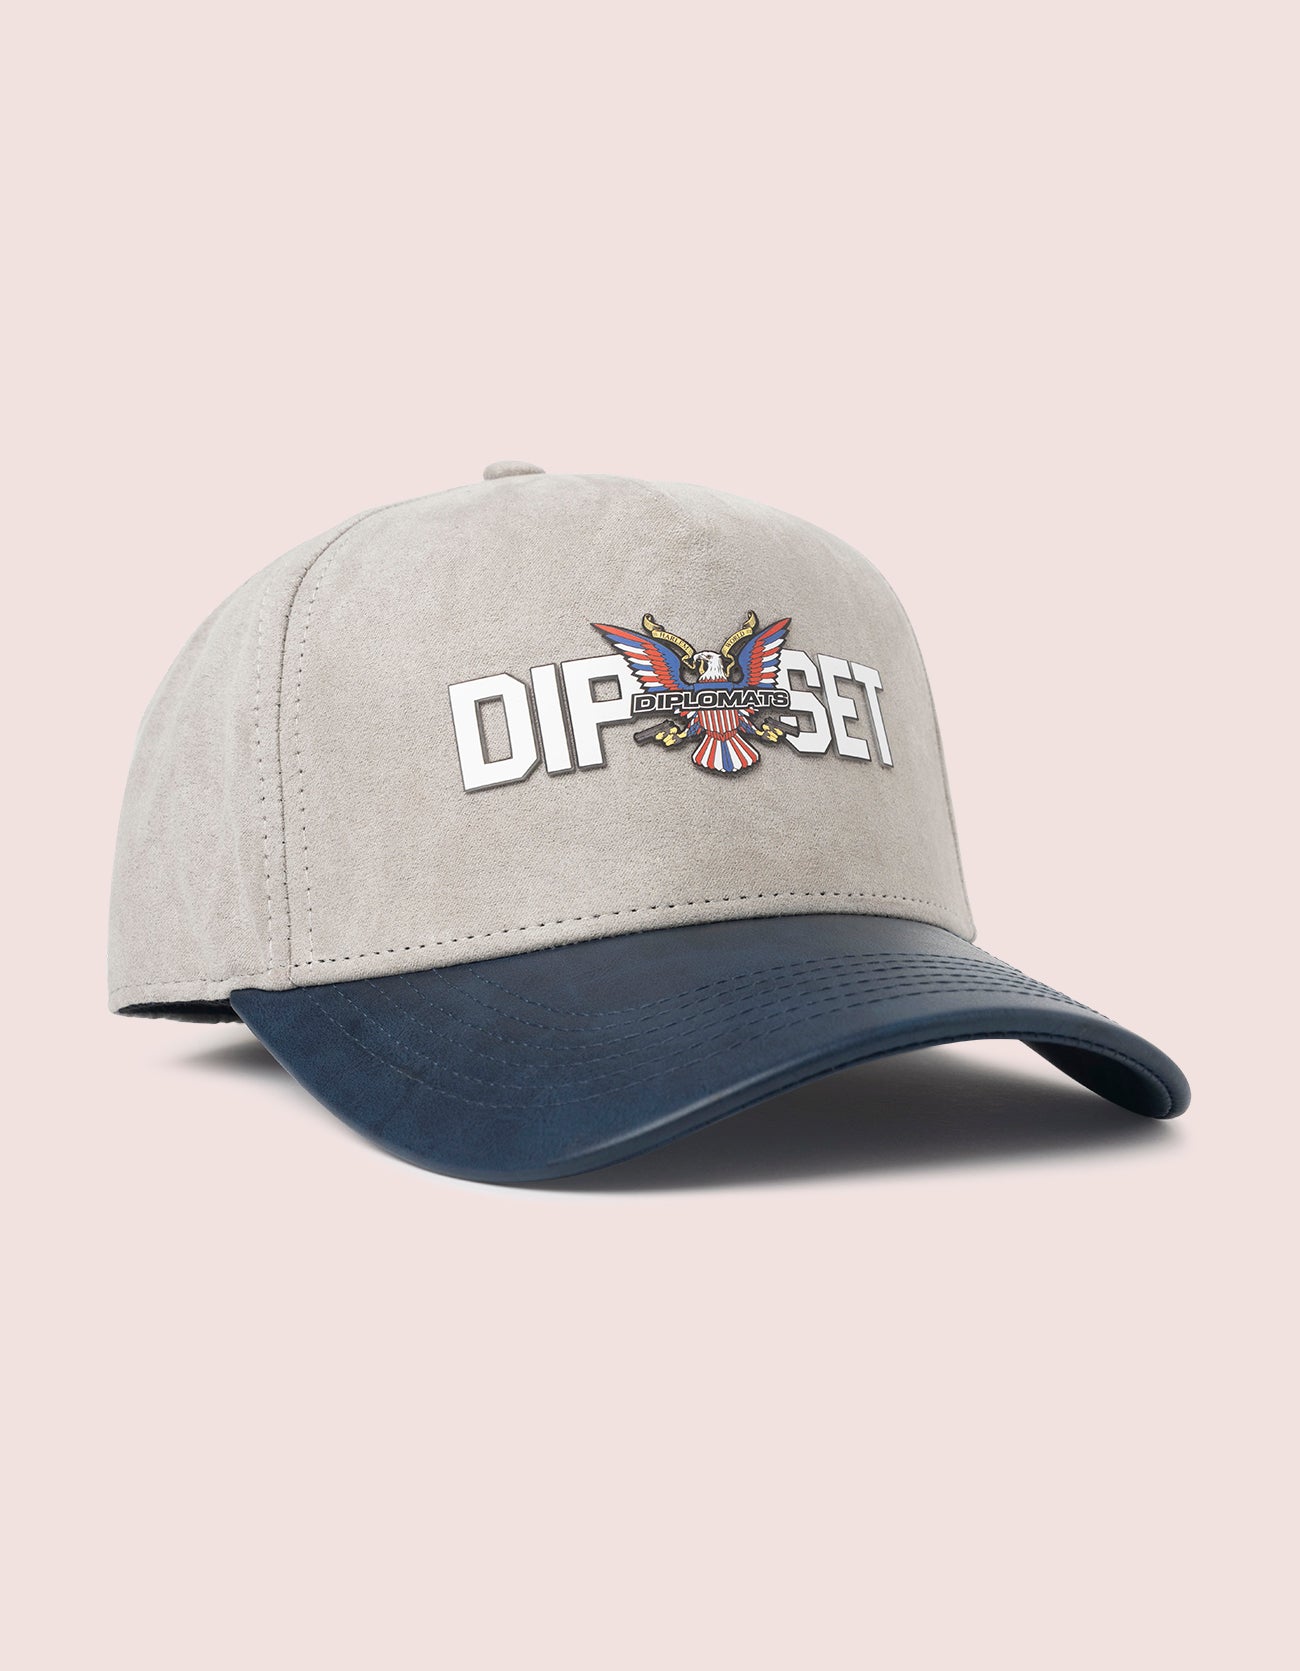 DIPSET COUTURE Classic Letter Grey